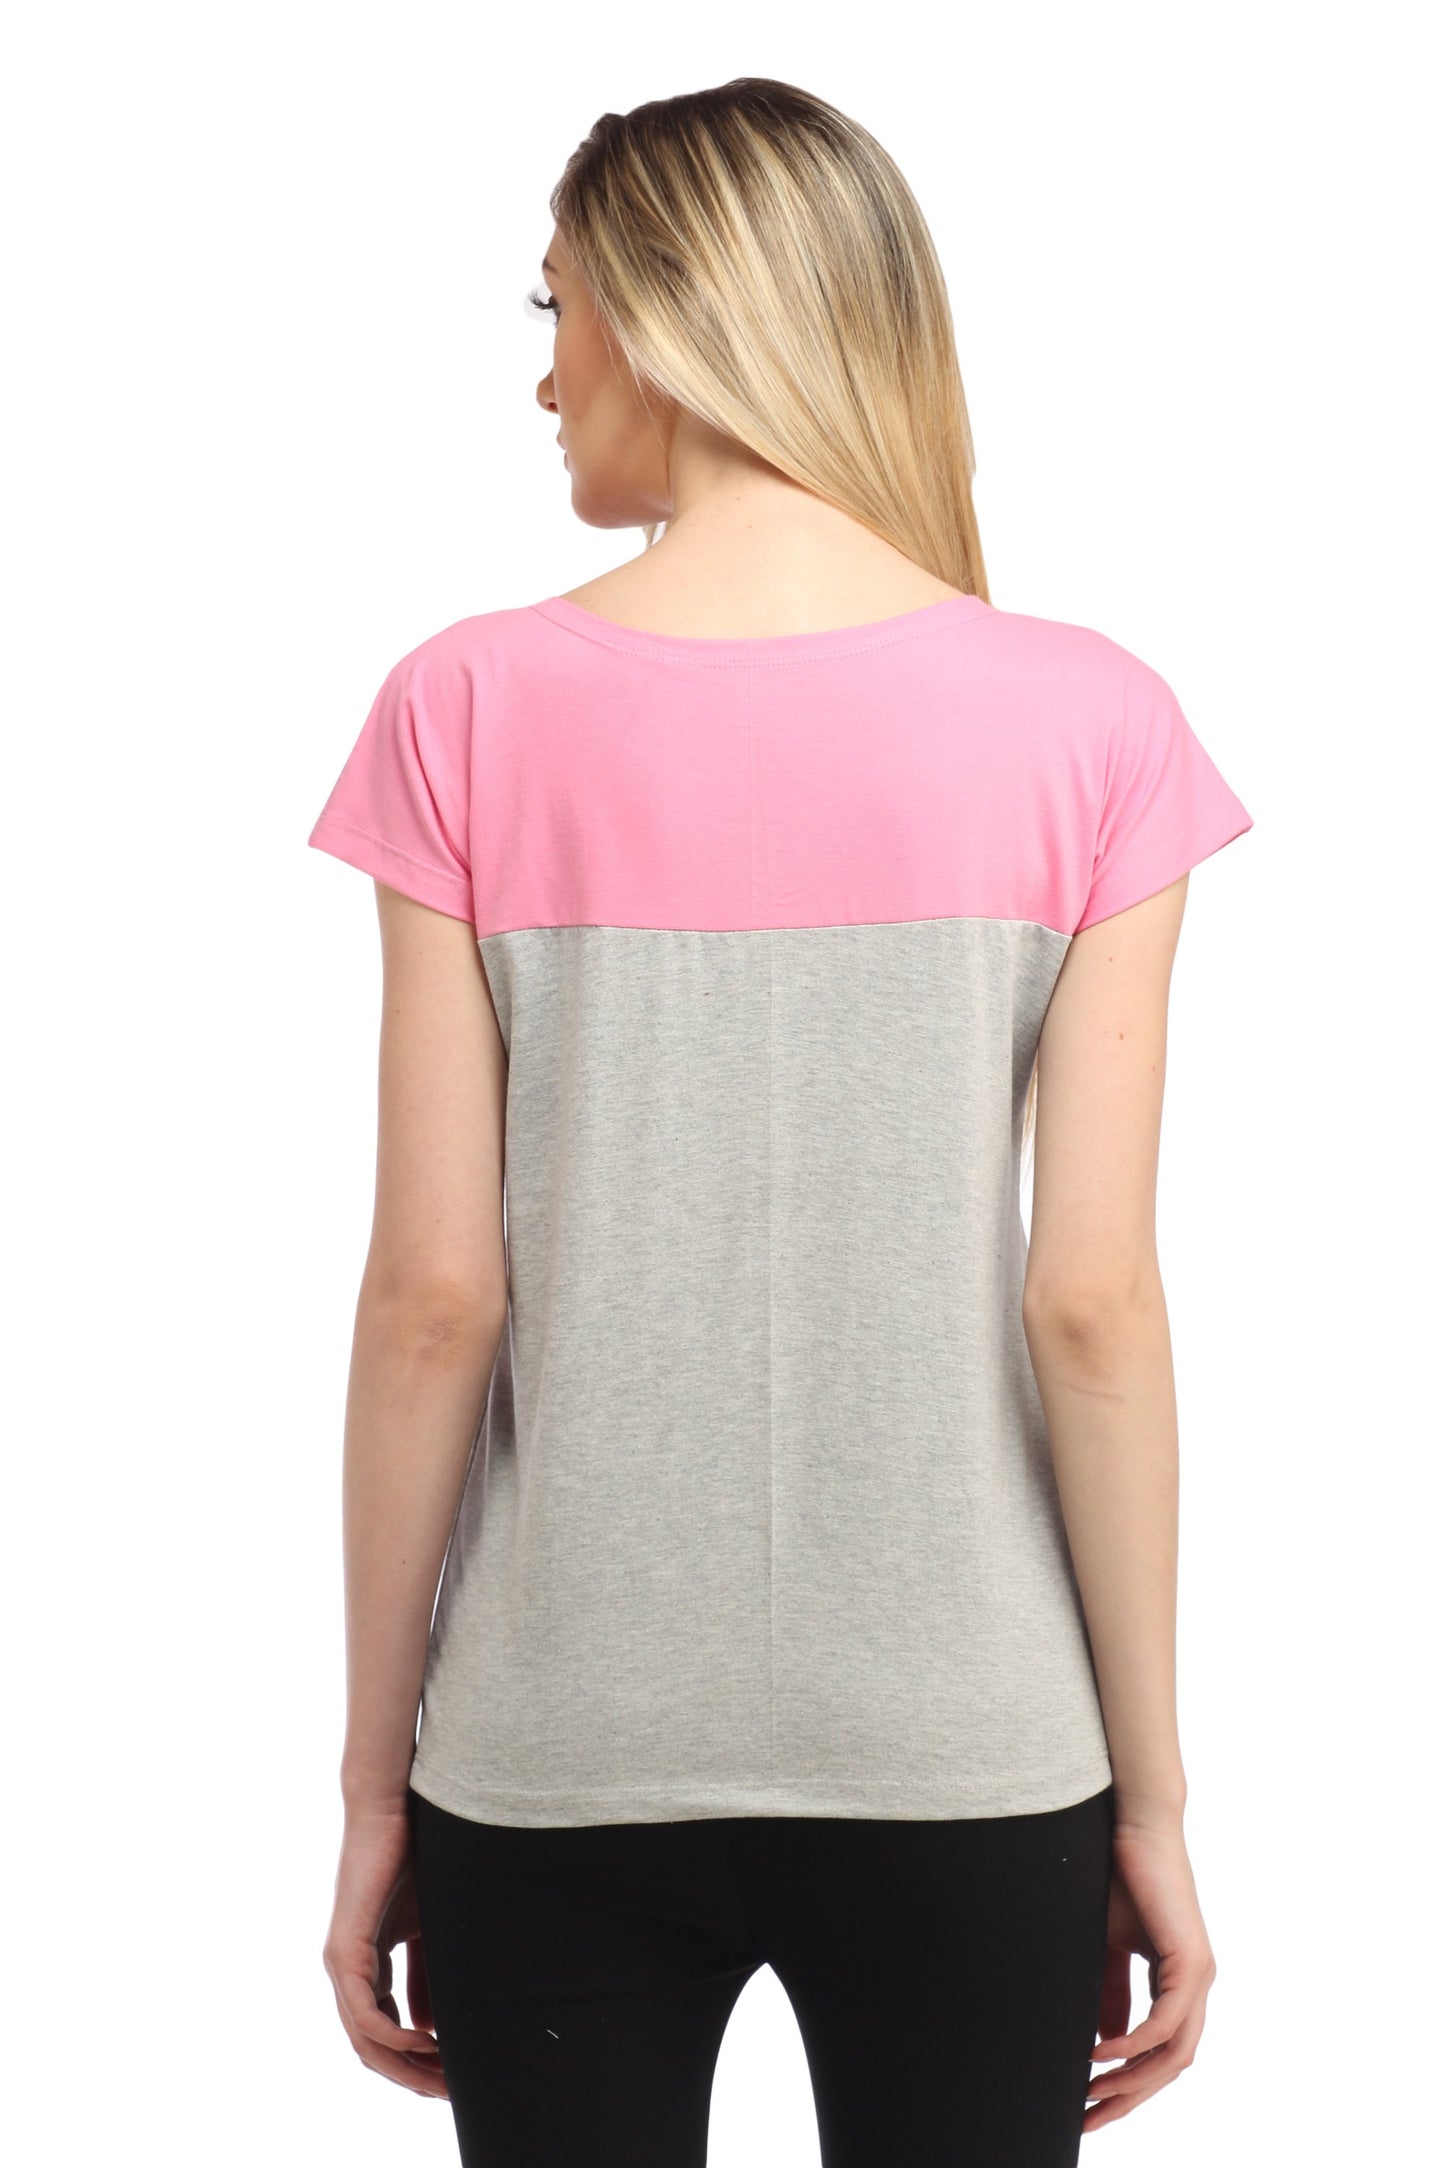 Grey and Pink Solid Top